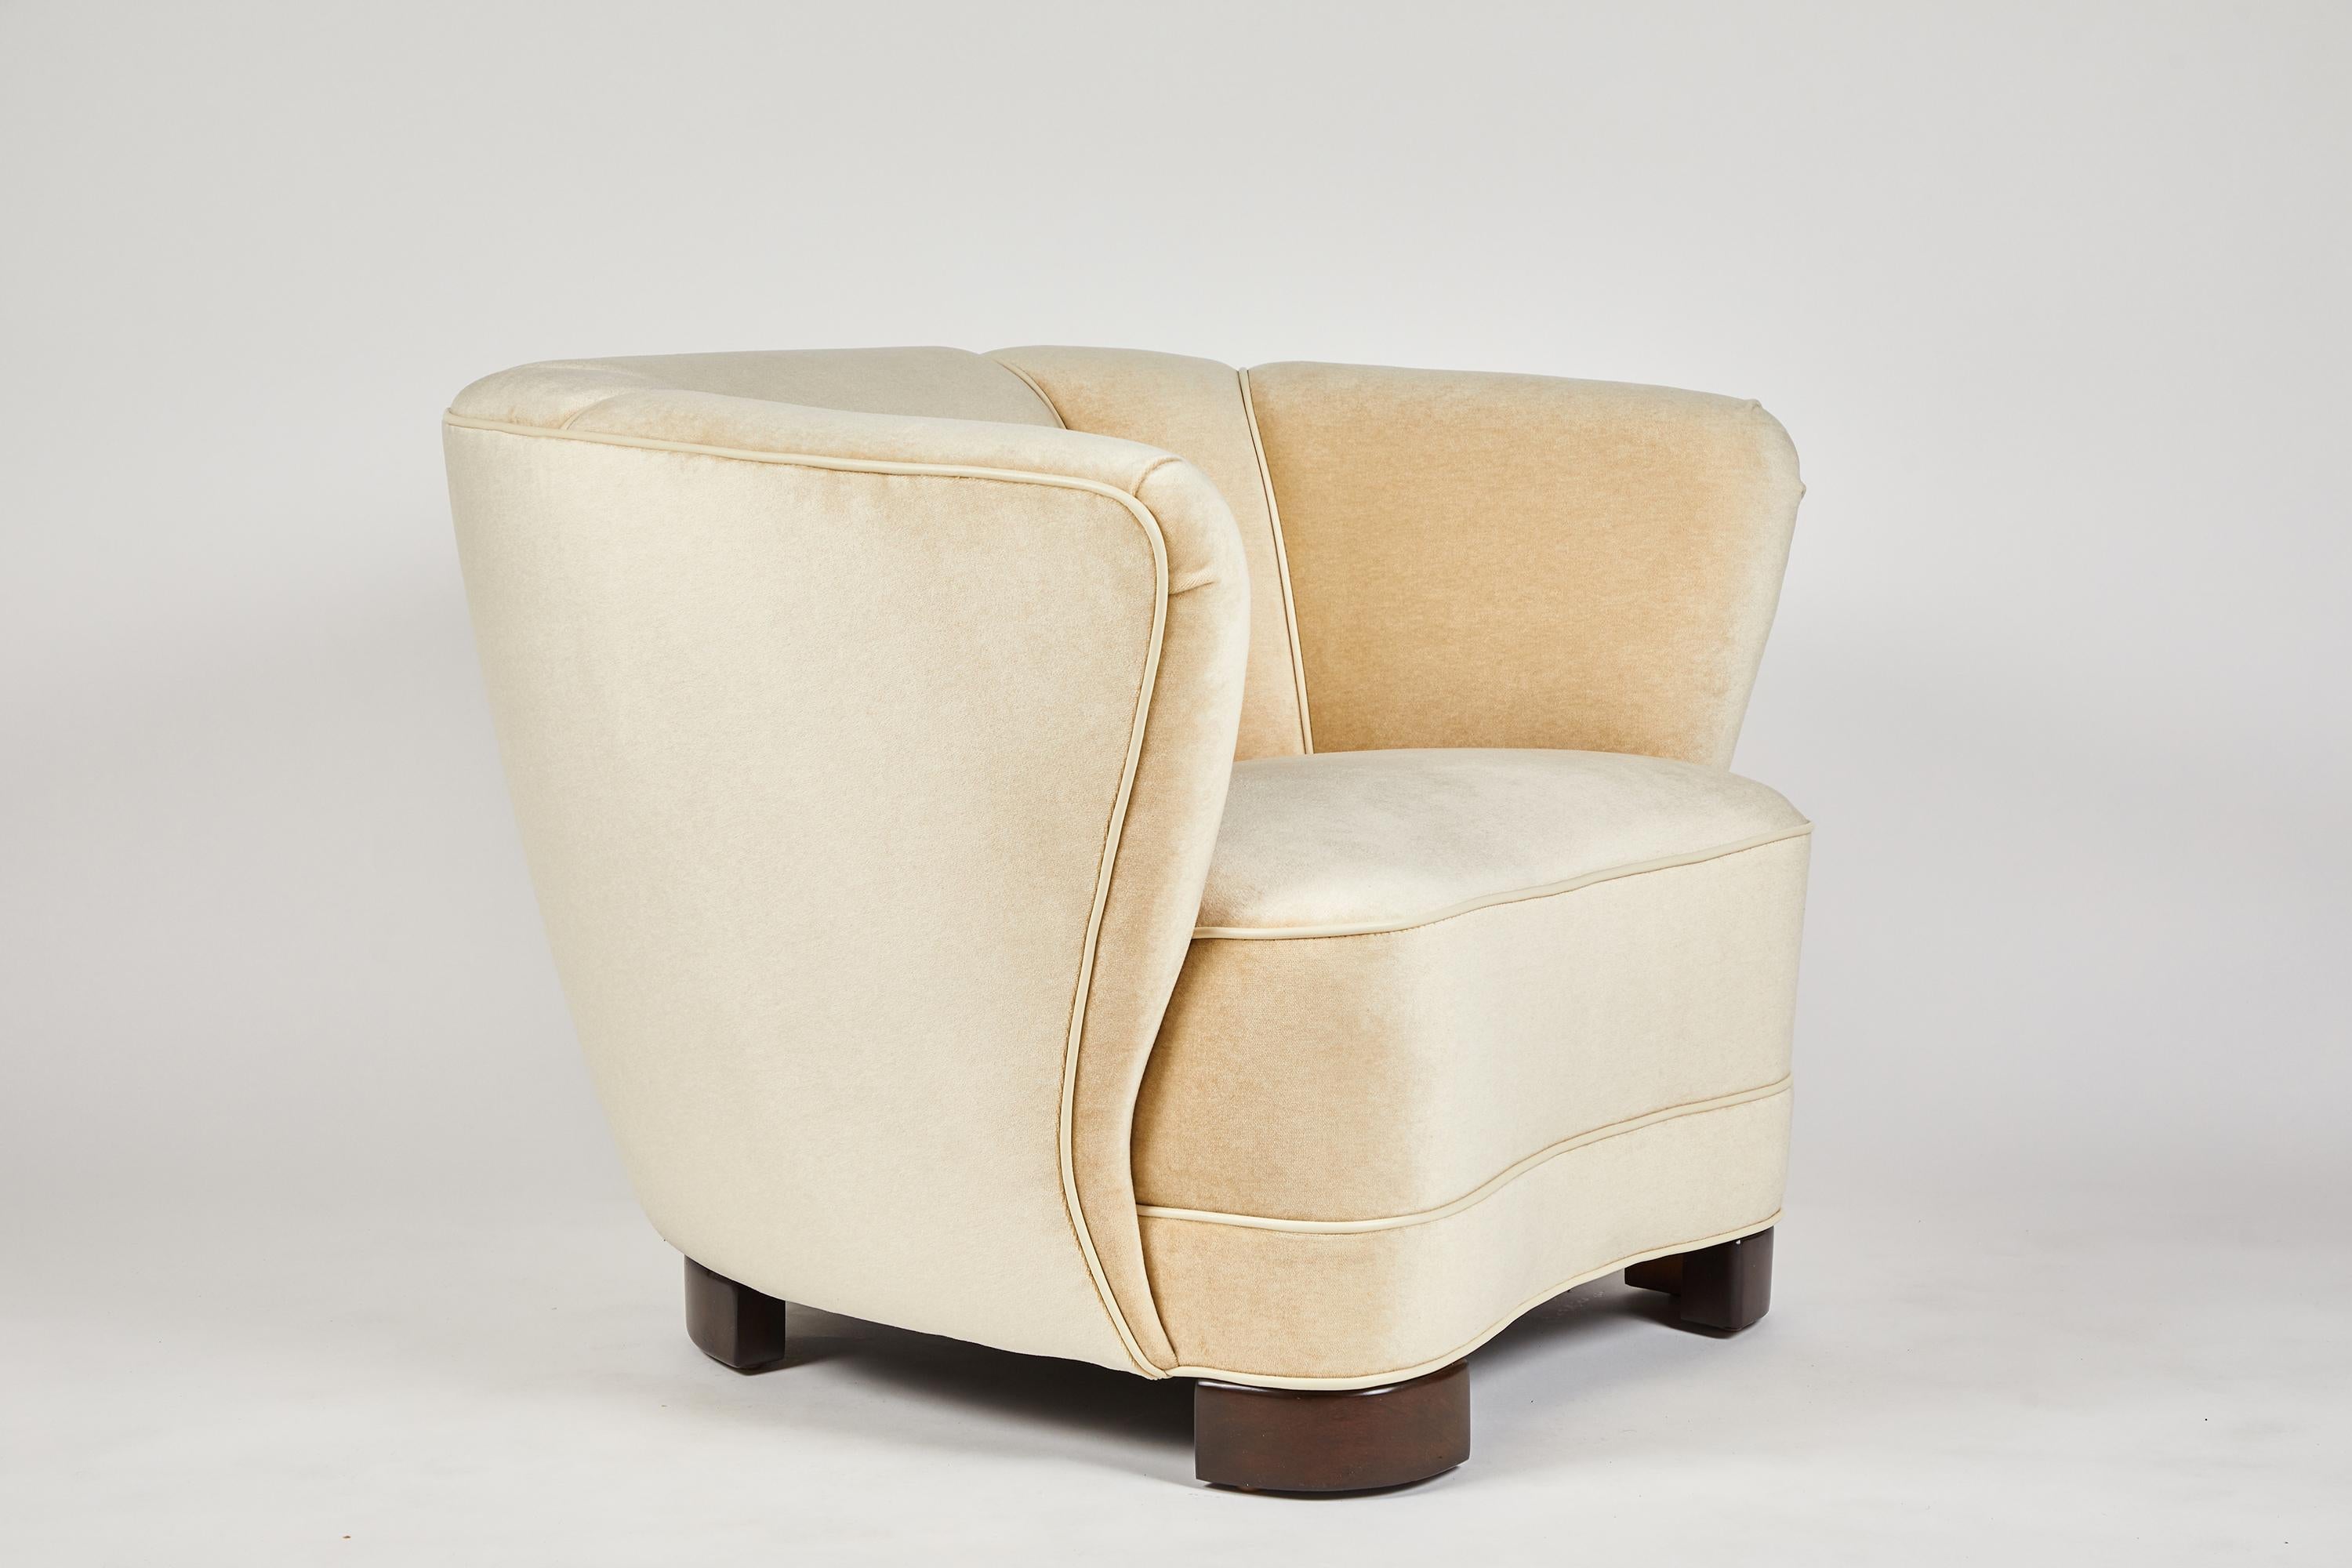 Sutton Place Club Chair by Dragonette Private Label 2